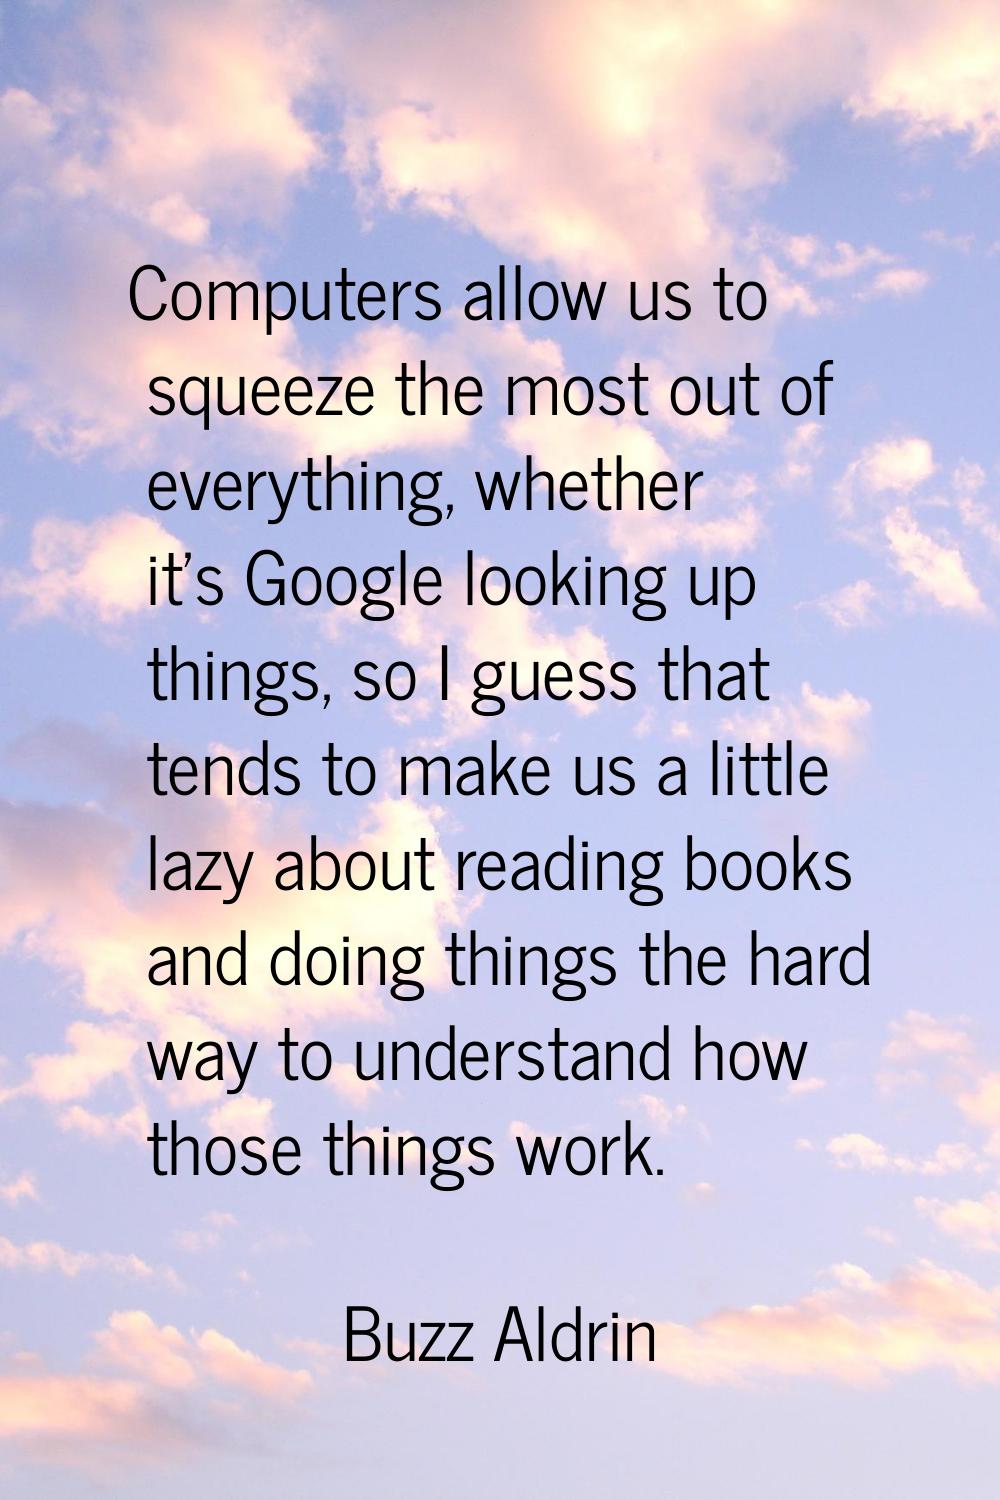 Computers allow us to squeeze the most out of everything, whether it's Google looking up things, so